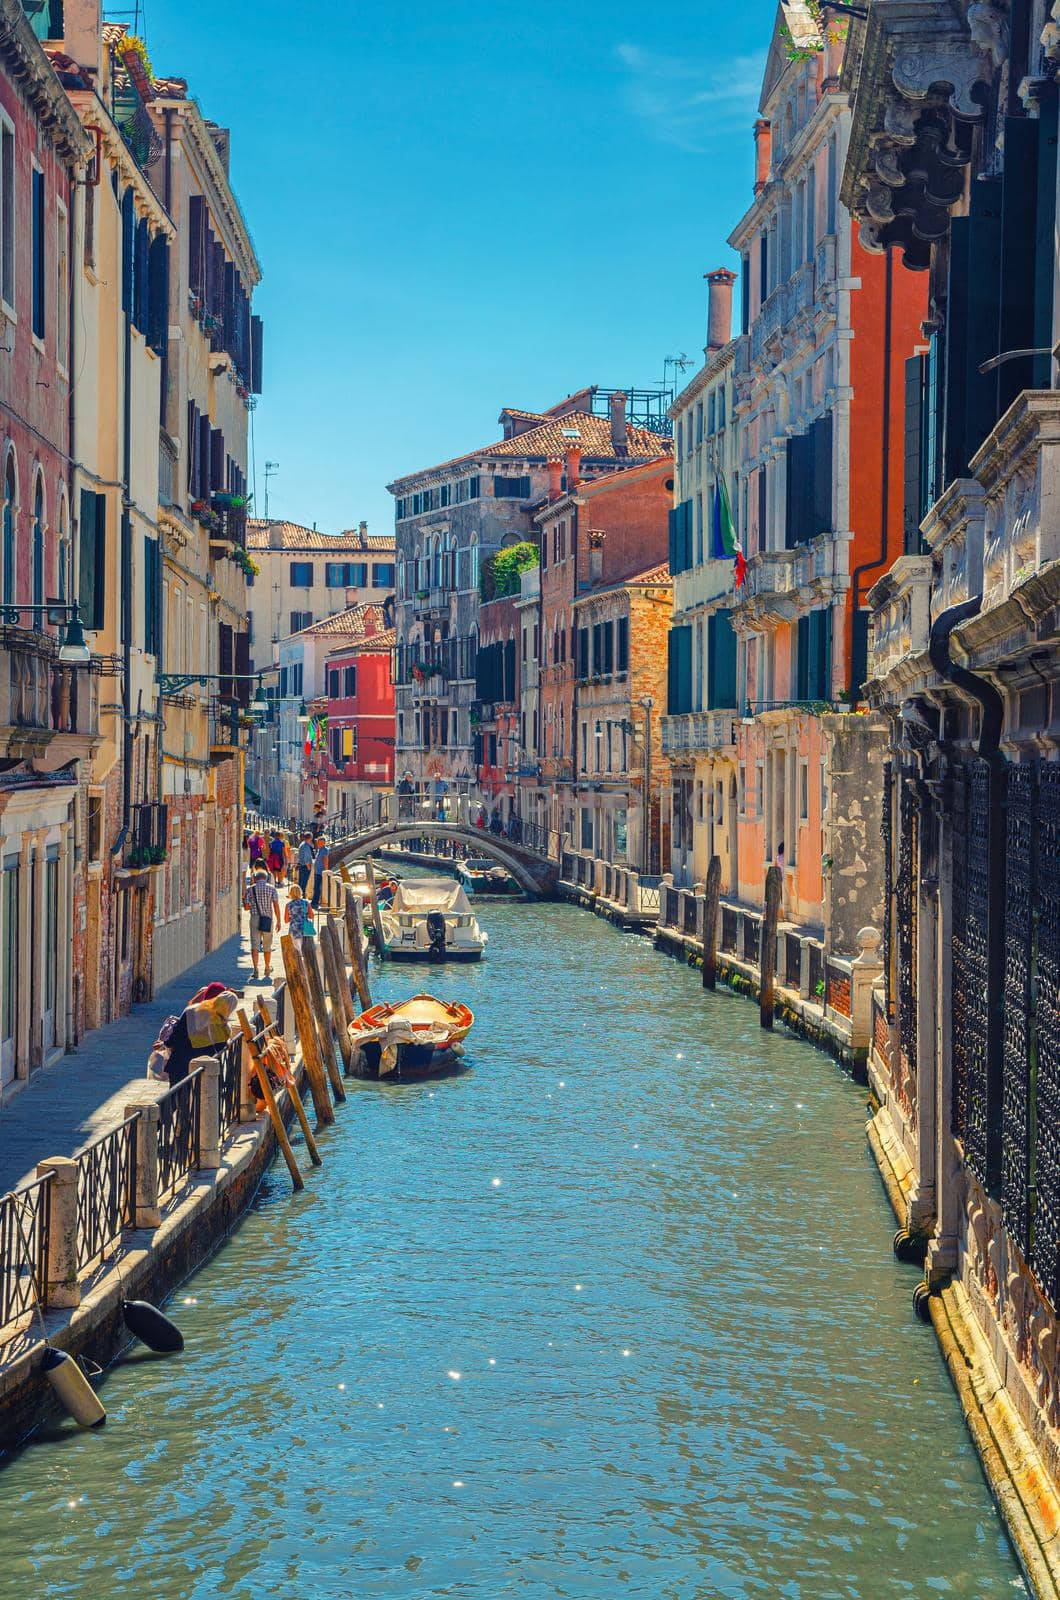 Venice cityscape with narrow water canal with moored boats between old colorful multicolored buildings and stone promenade, Veneto Region, Northern Italy. vertical view, blue sky background.